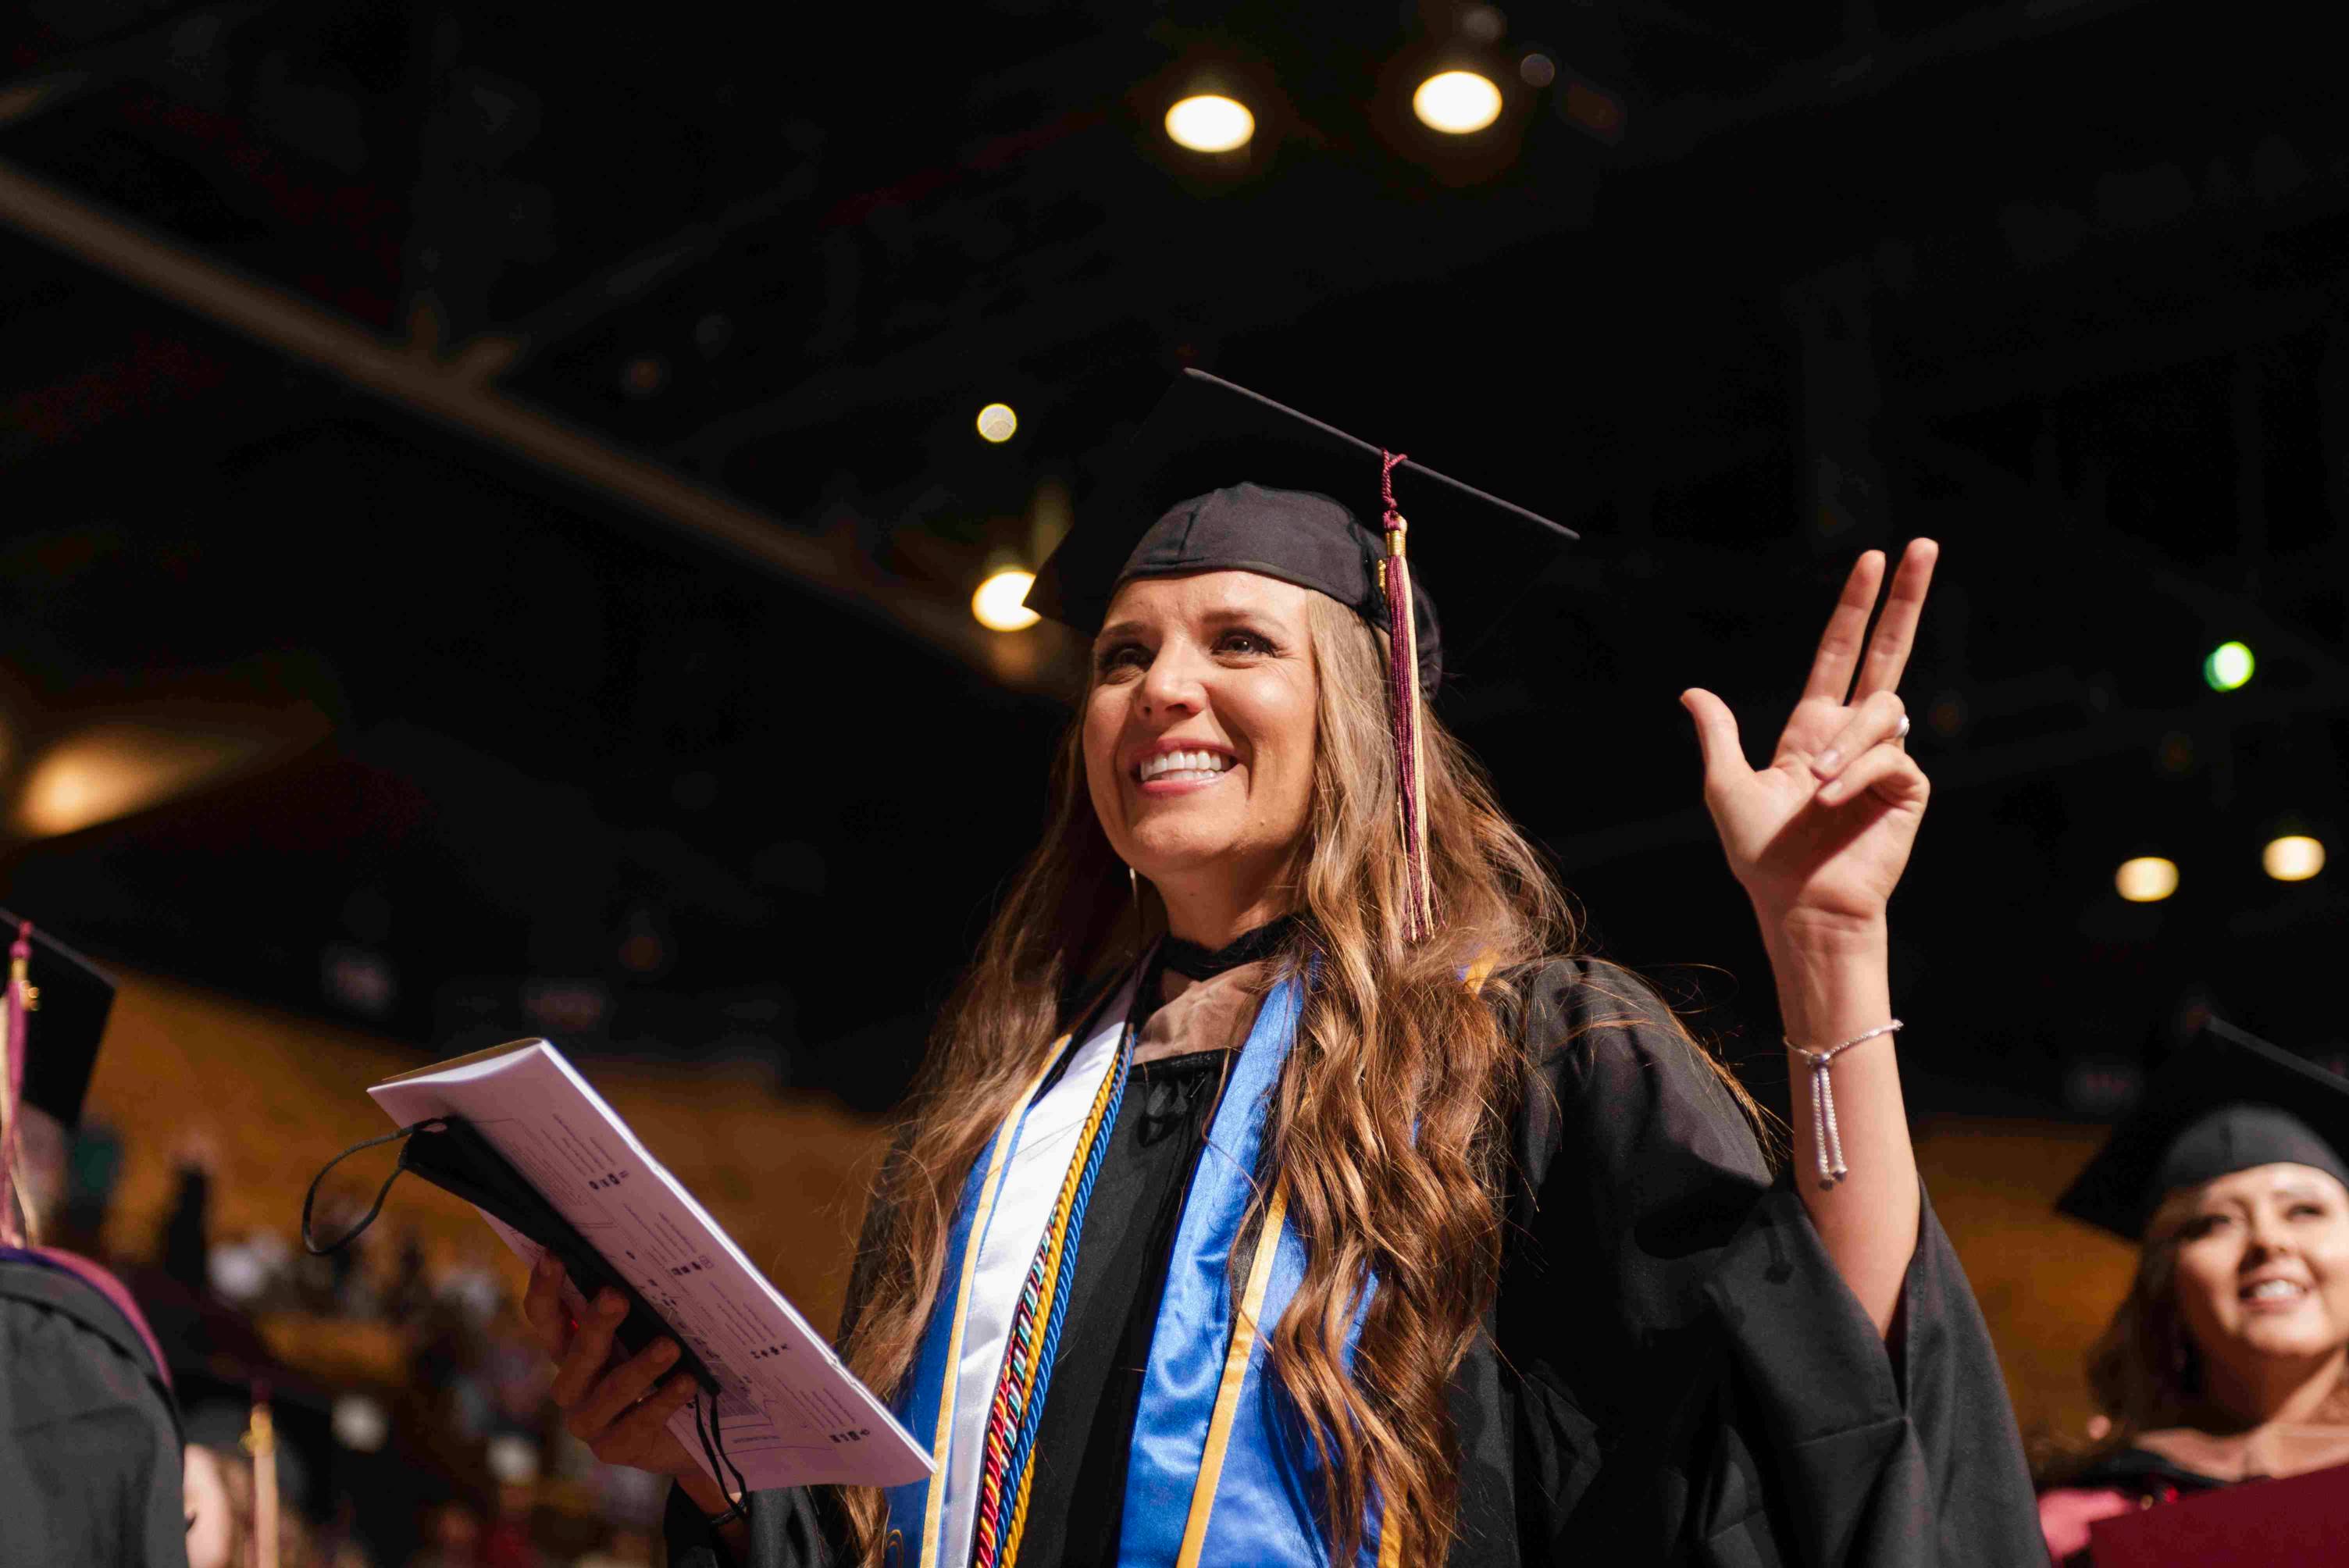 a student holds up the Texas State hand sign during a commencement ceremony